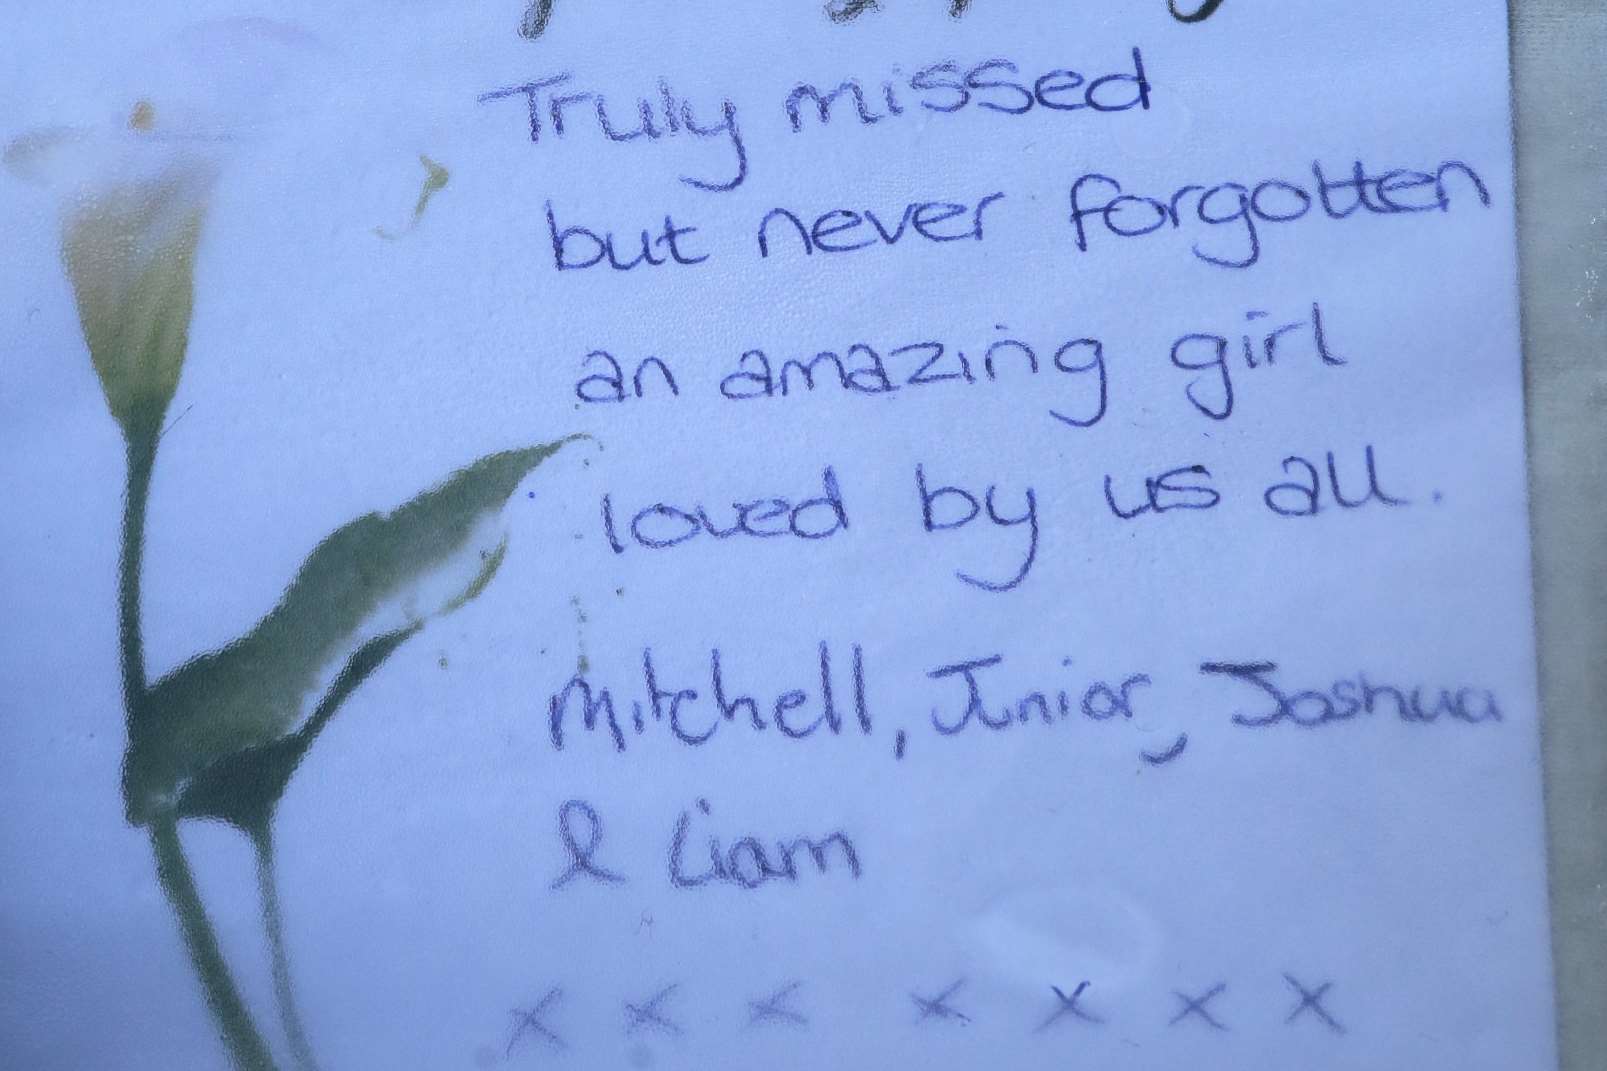 Tributes at the scene of the fatal accident